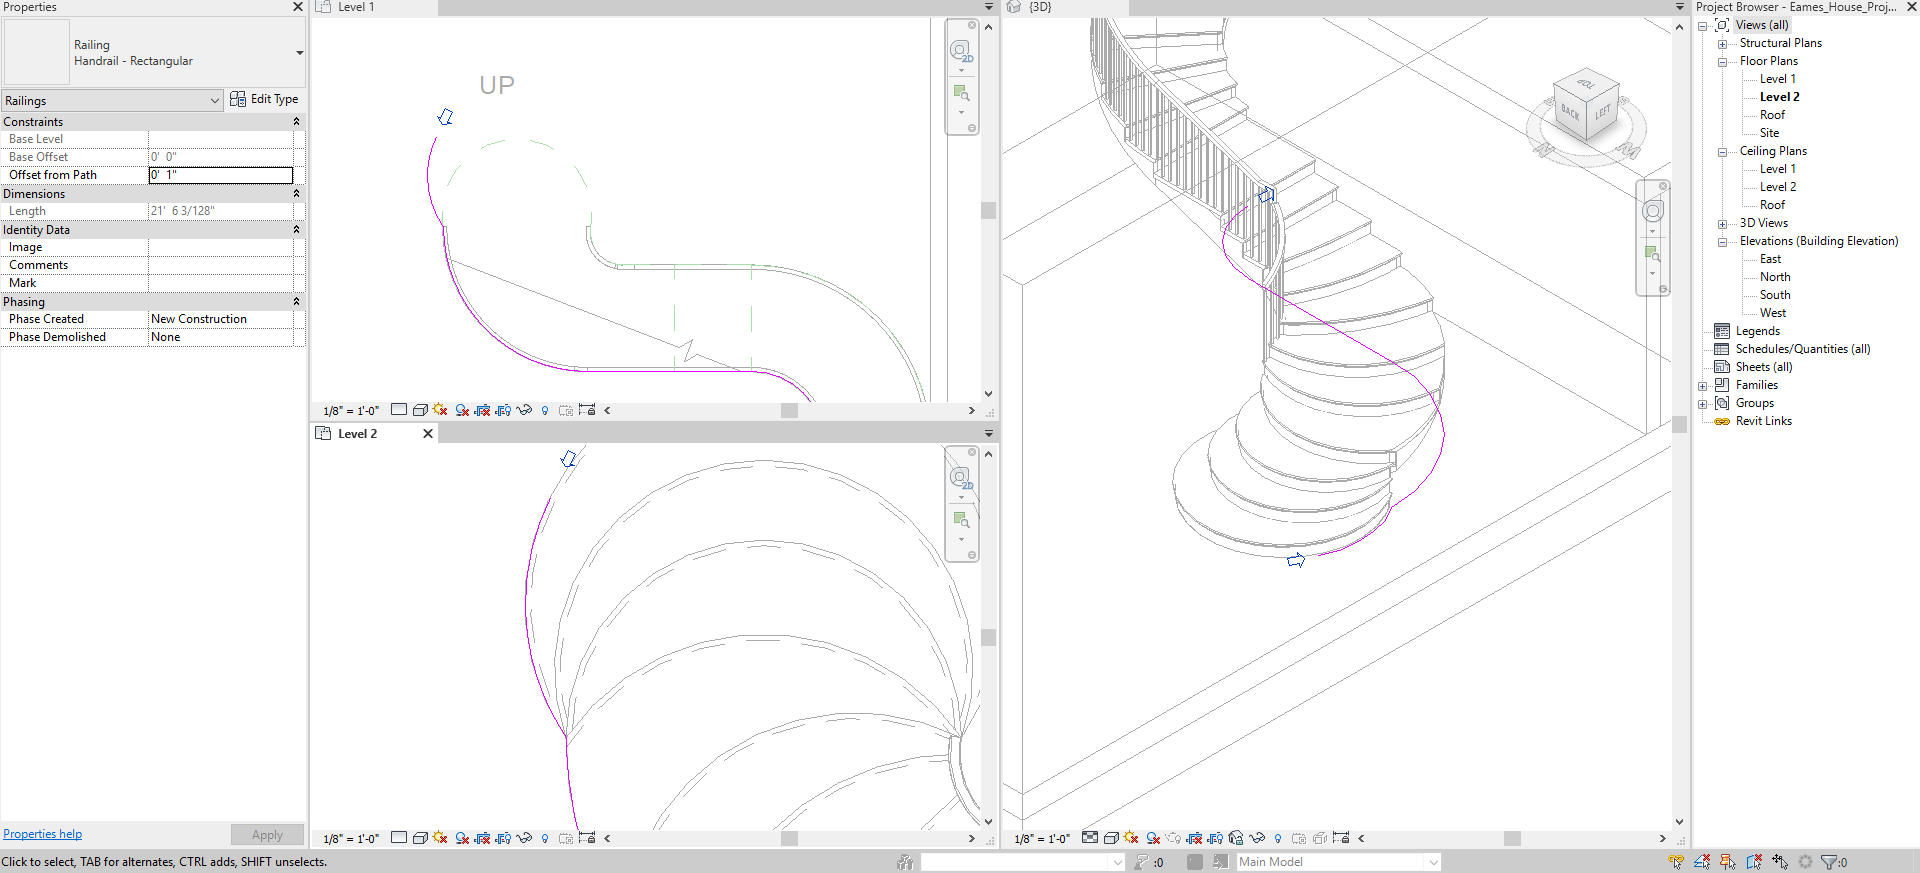 This image shows the process image to edit the railing.